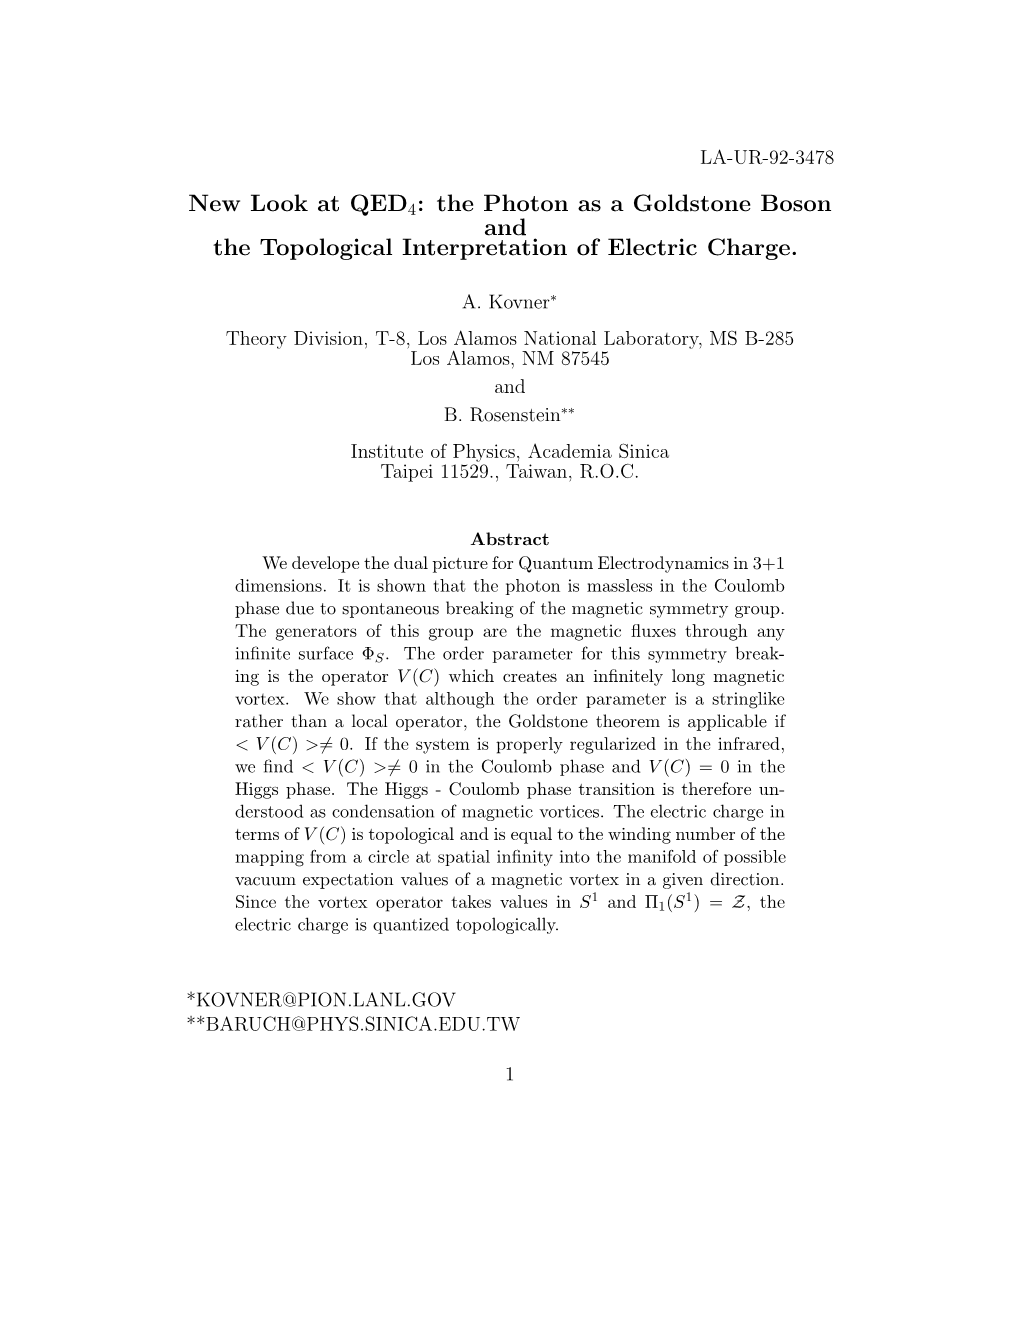 The Photon As a Goldstone Boson and the Topological Interpretation of Electric Charge